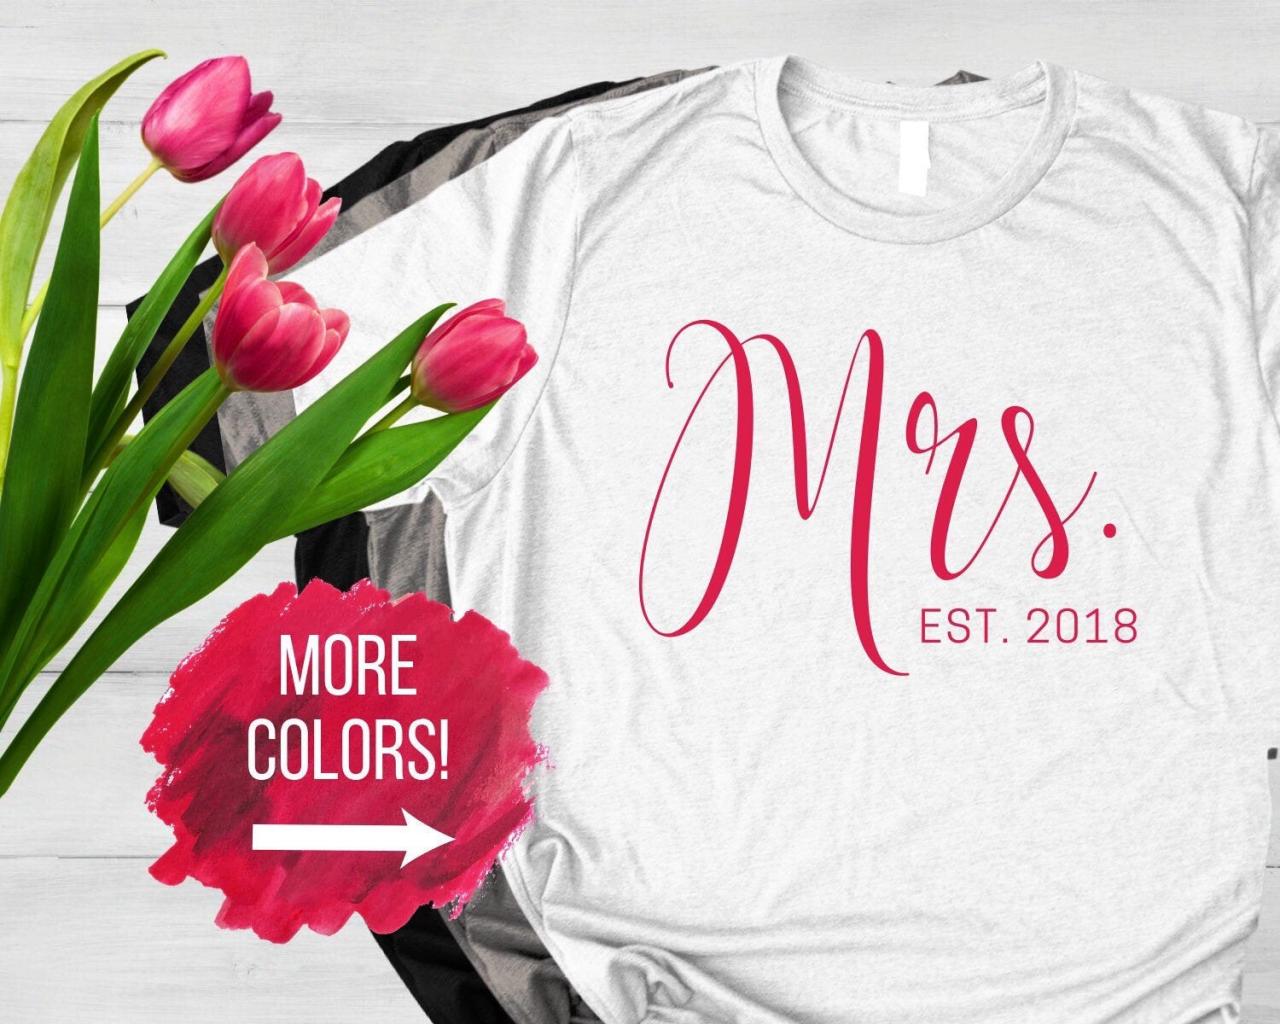 Personalized Mrs Shirt, Custom Date, Newlyweds, Couples, Honeymoon, Just Married, Wedding Gift, Bridal Shower, Engagement, His And Hers